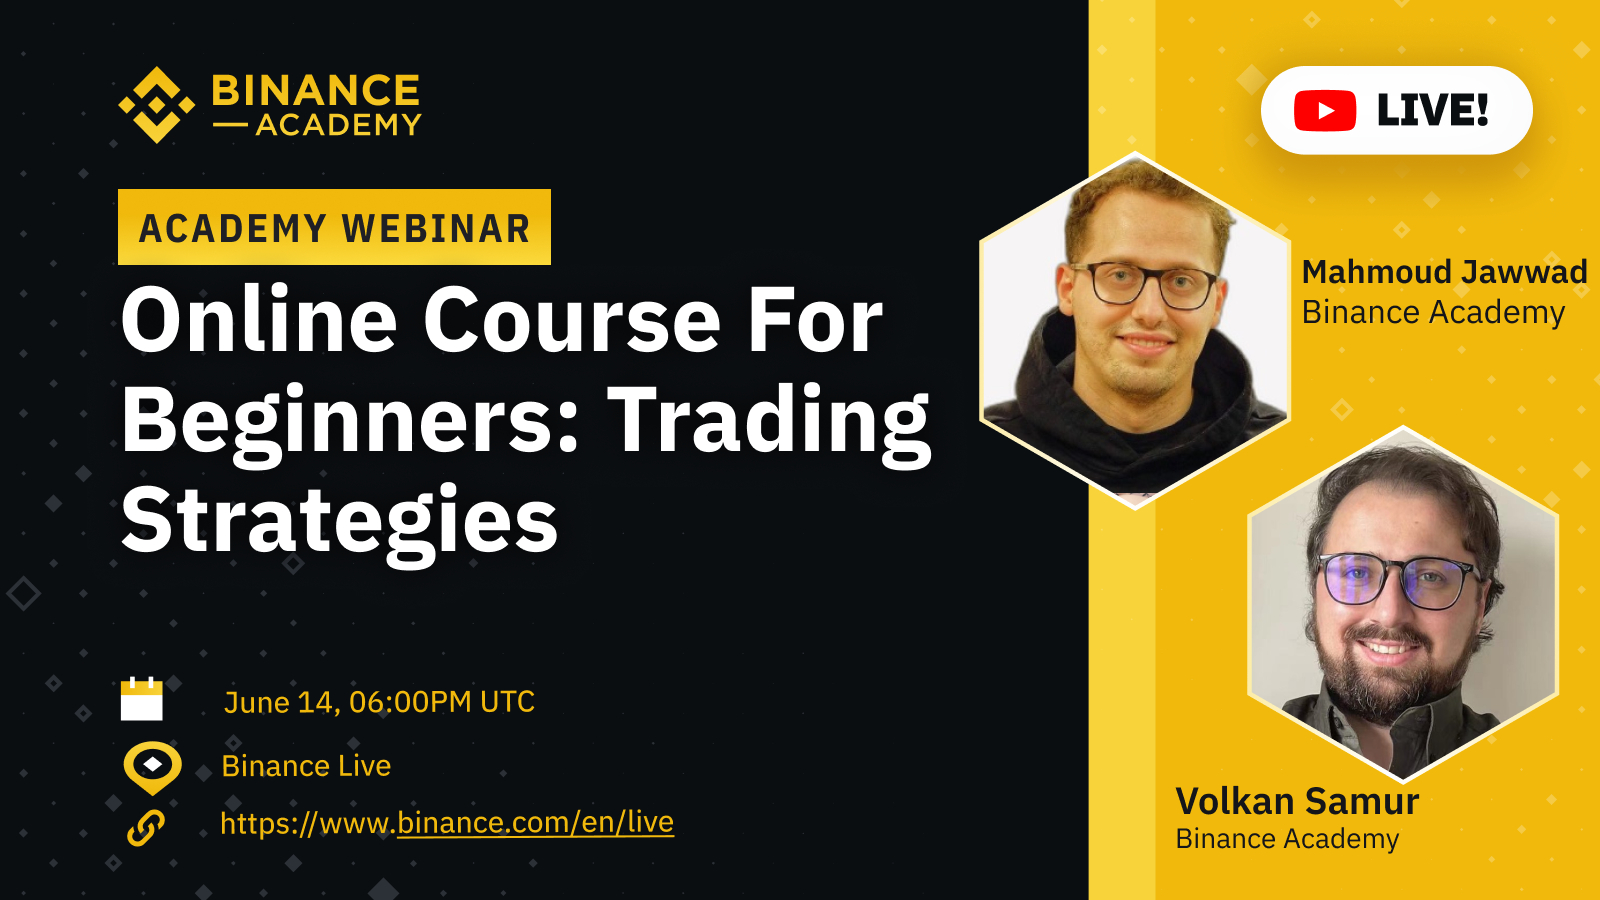 Online Course For Beginners: Trading Strategies